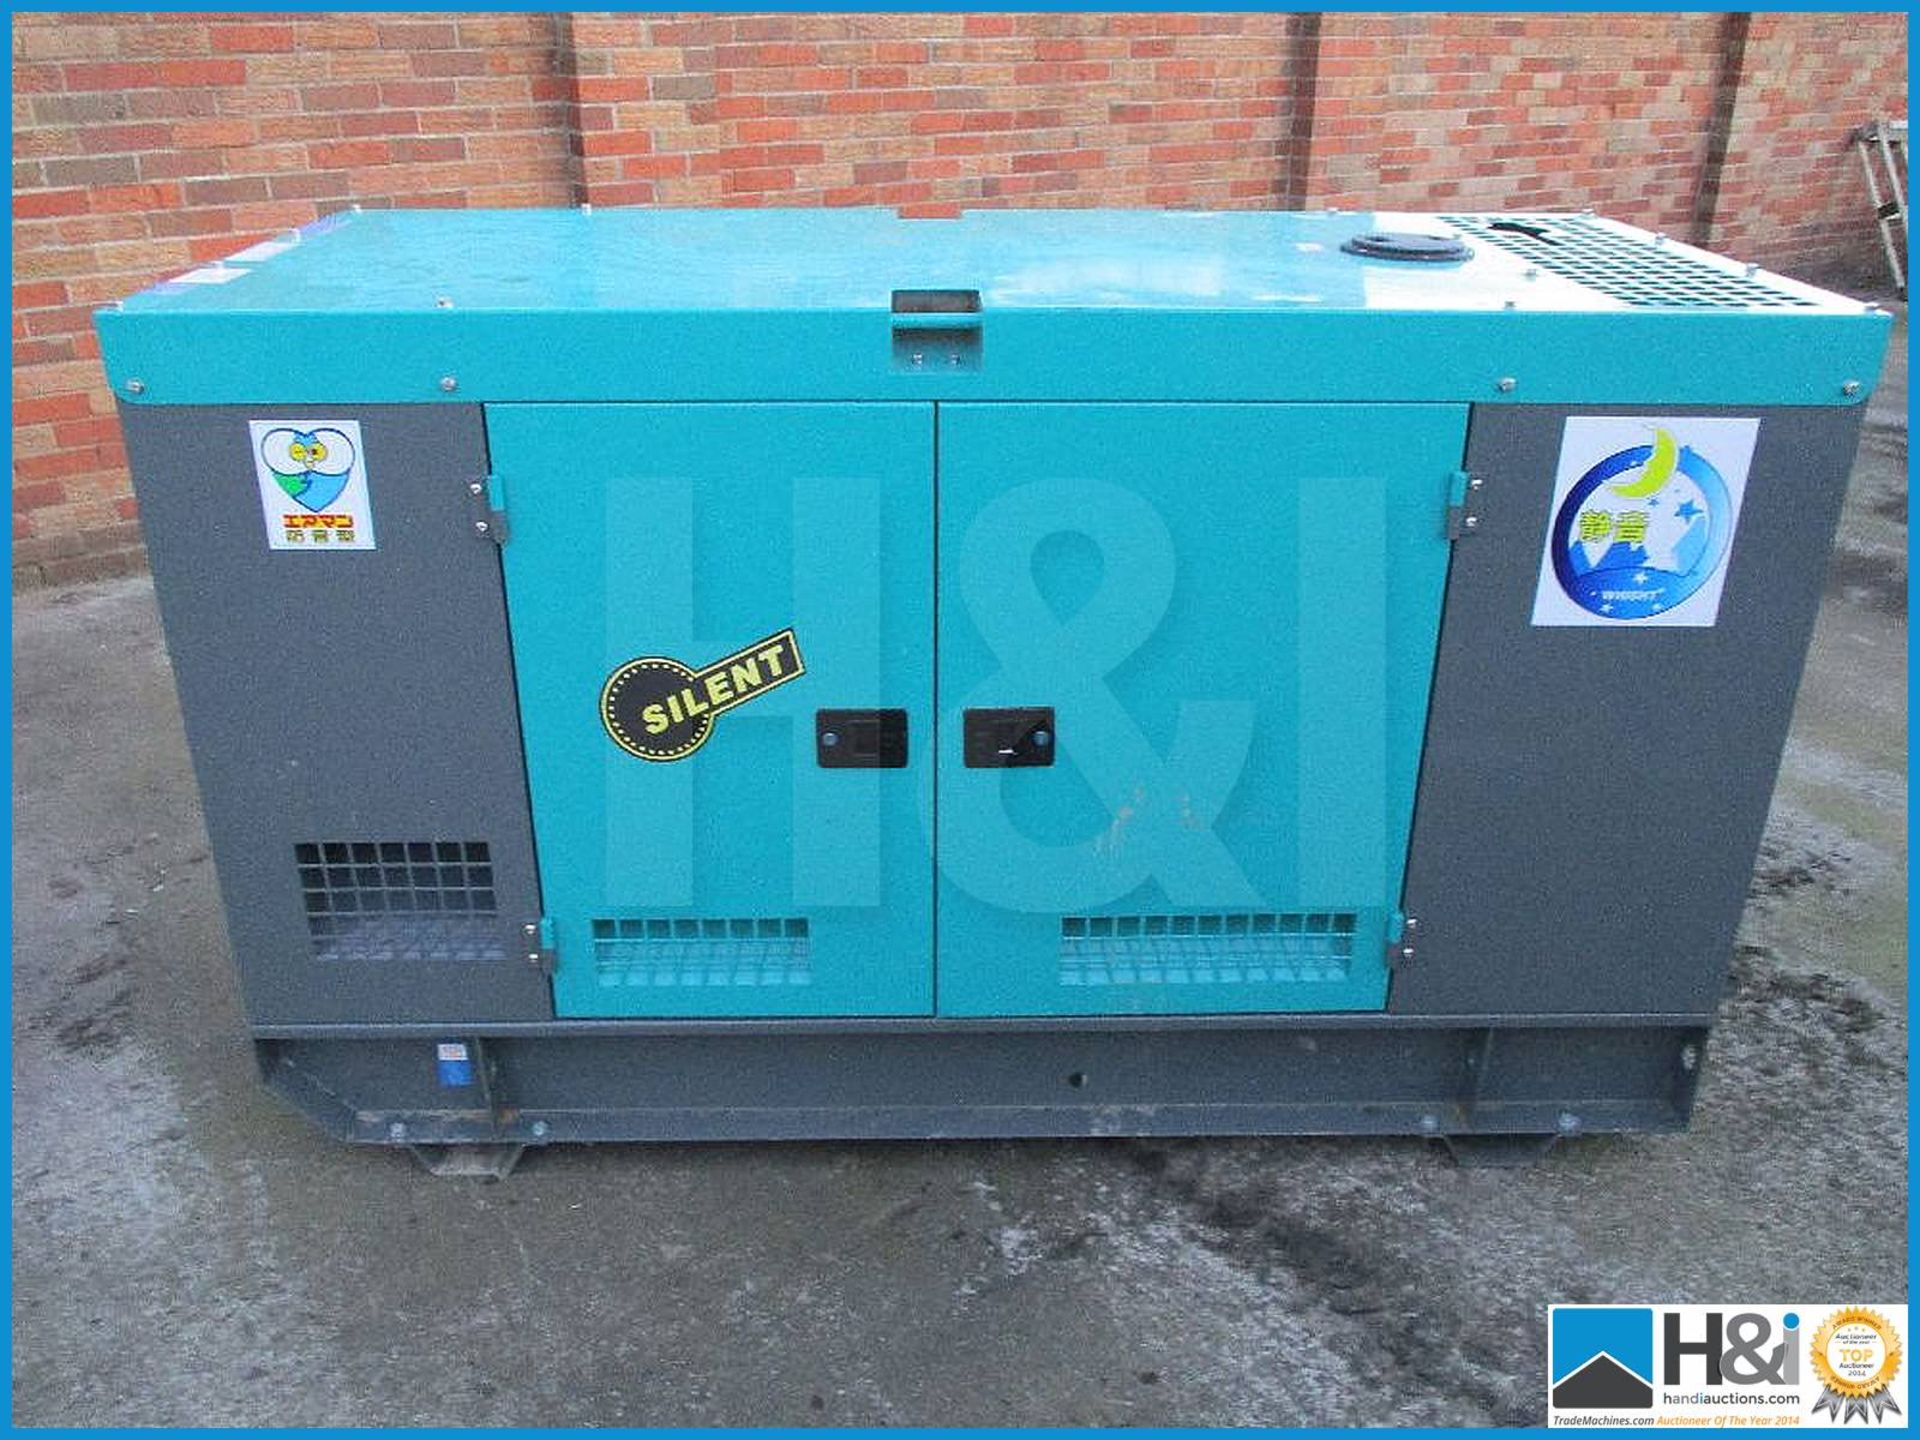 ASHITA 30 KVA generator Brand new single and three phase power, ready for use, we have sold large qu - Image 3 of 5